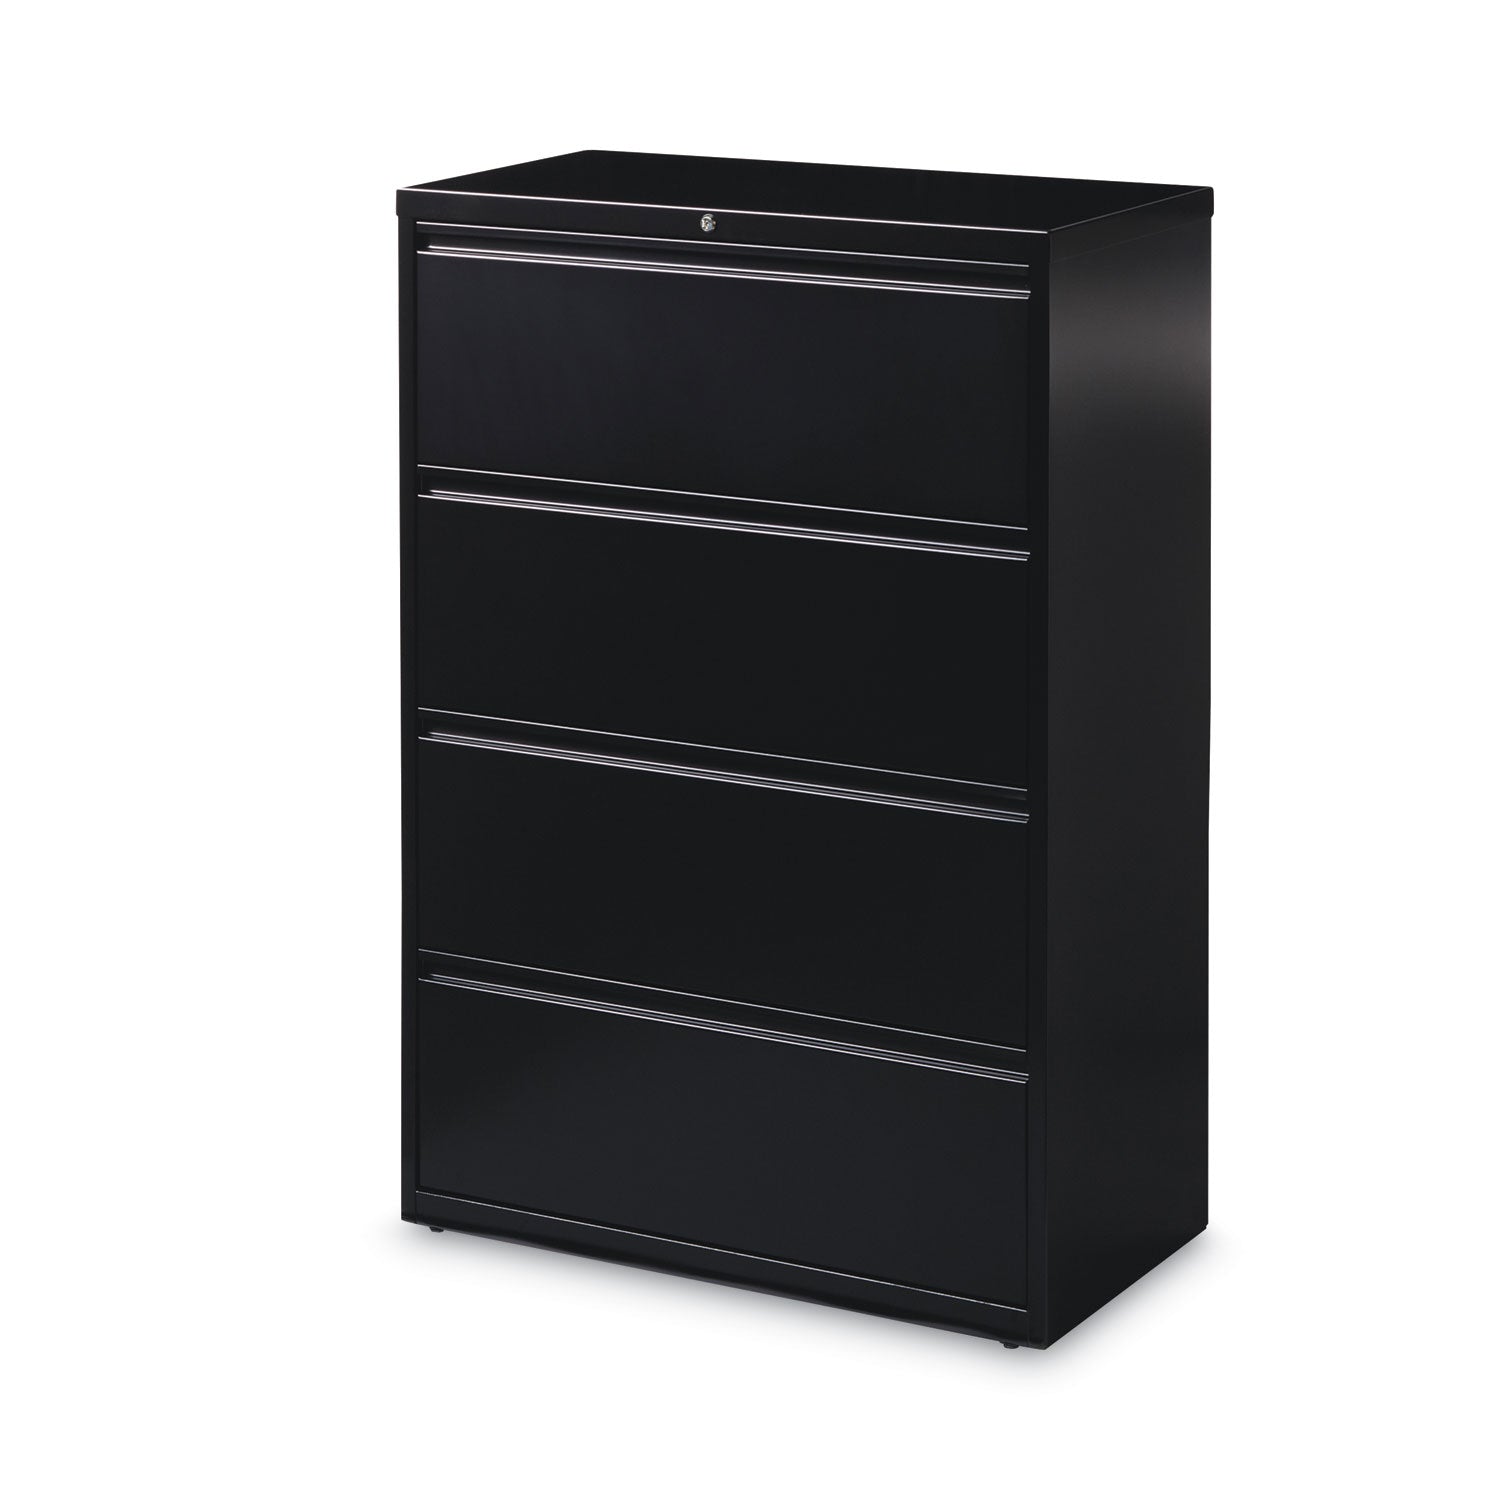 lateral-file-cabinet-4-letter-legal-a4-size-file-drawers-black-36-x-1862-x-525_hid14989 - 1